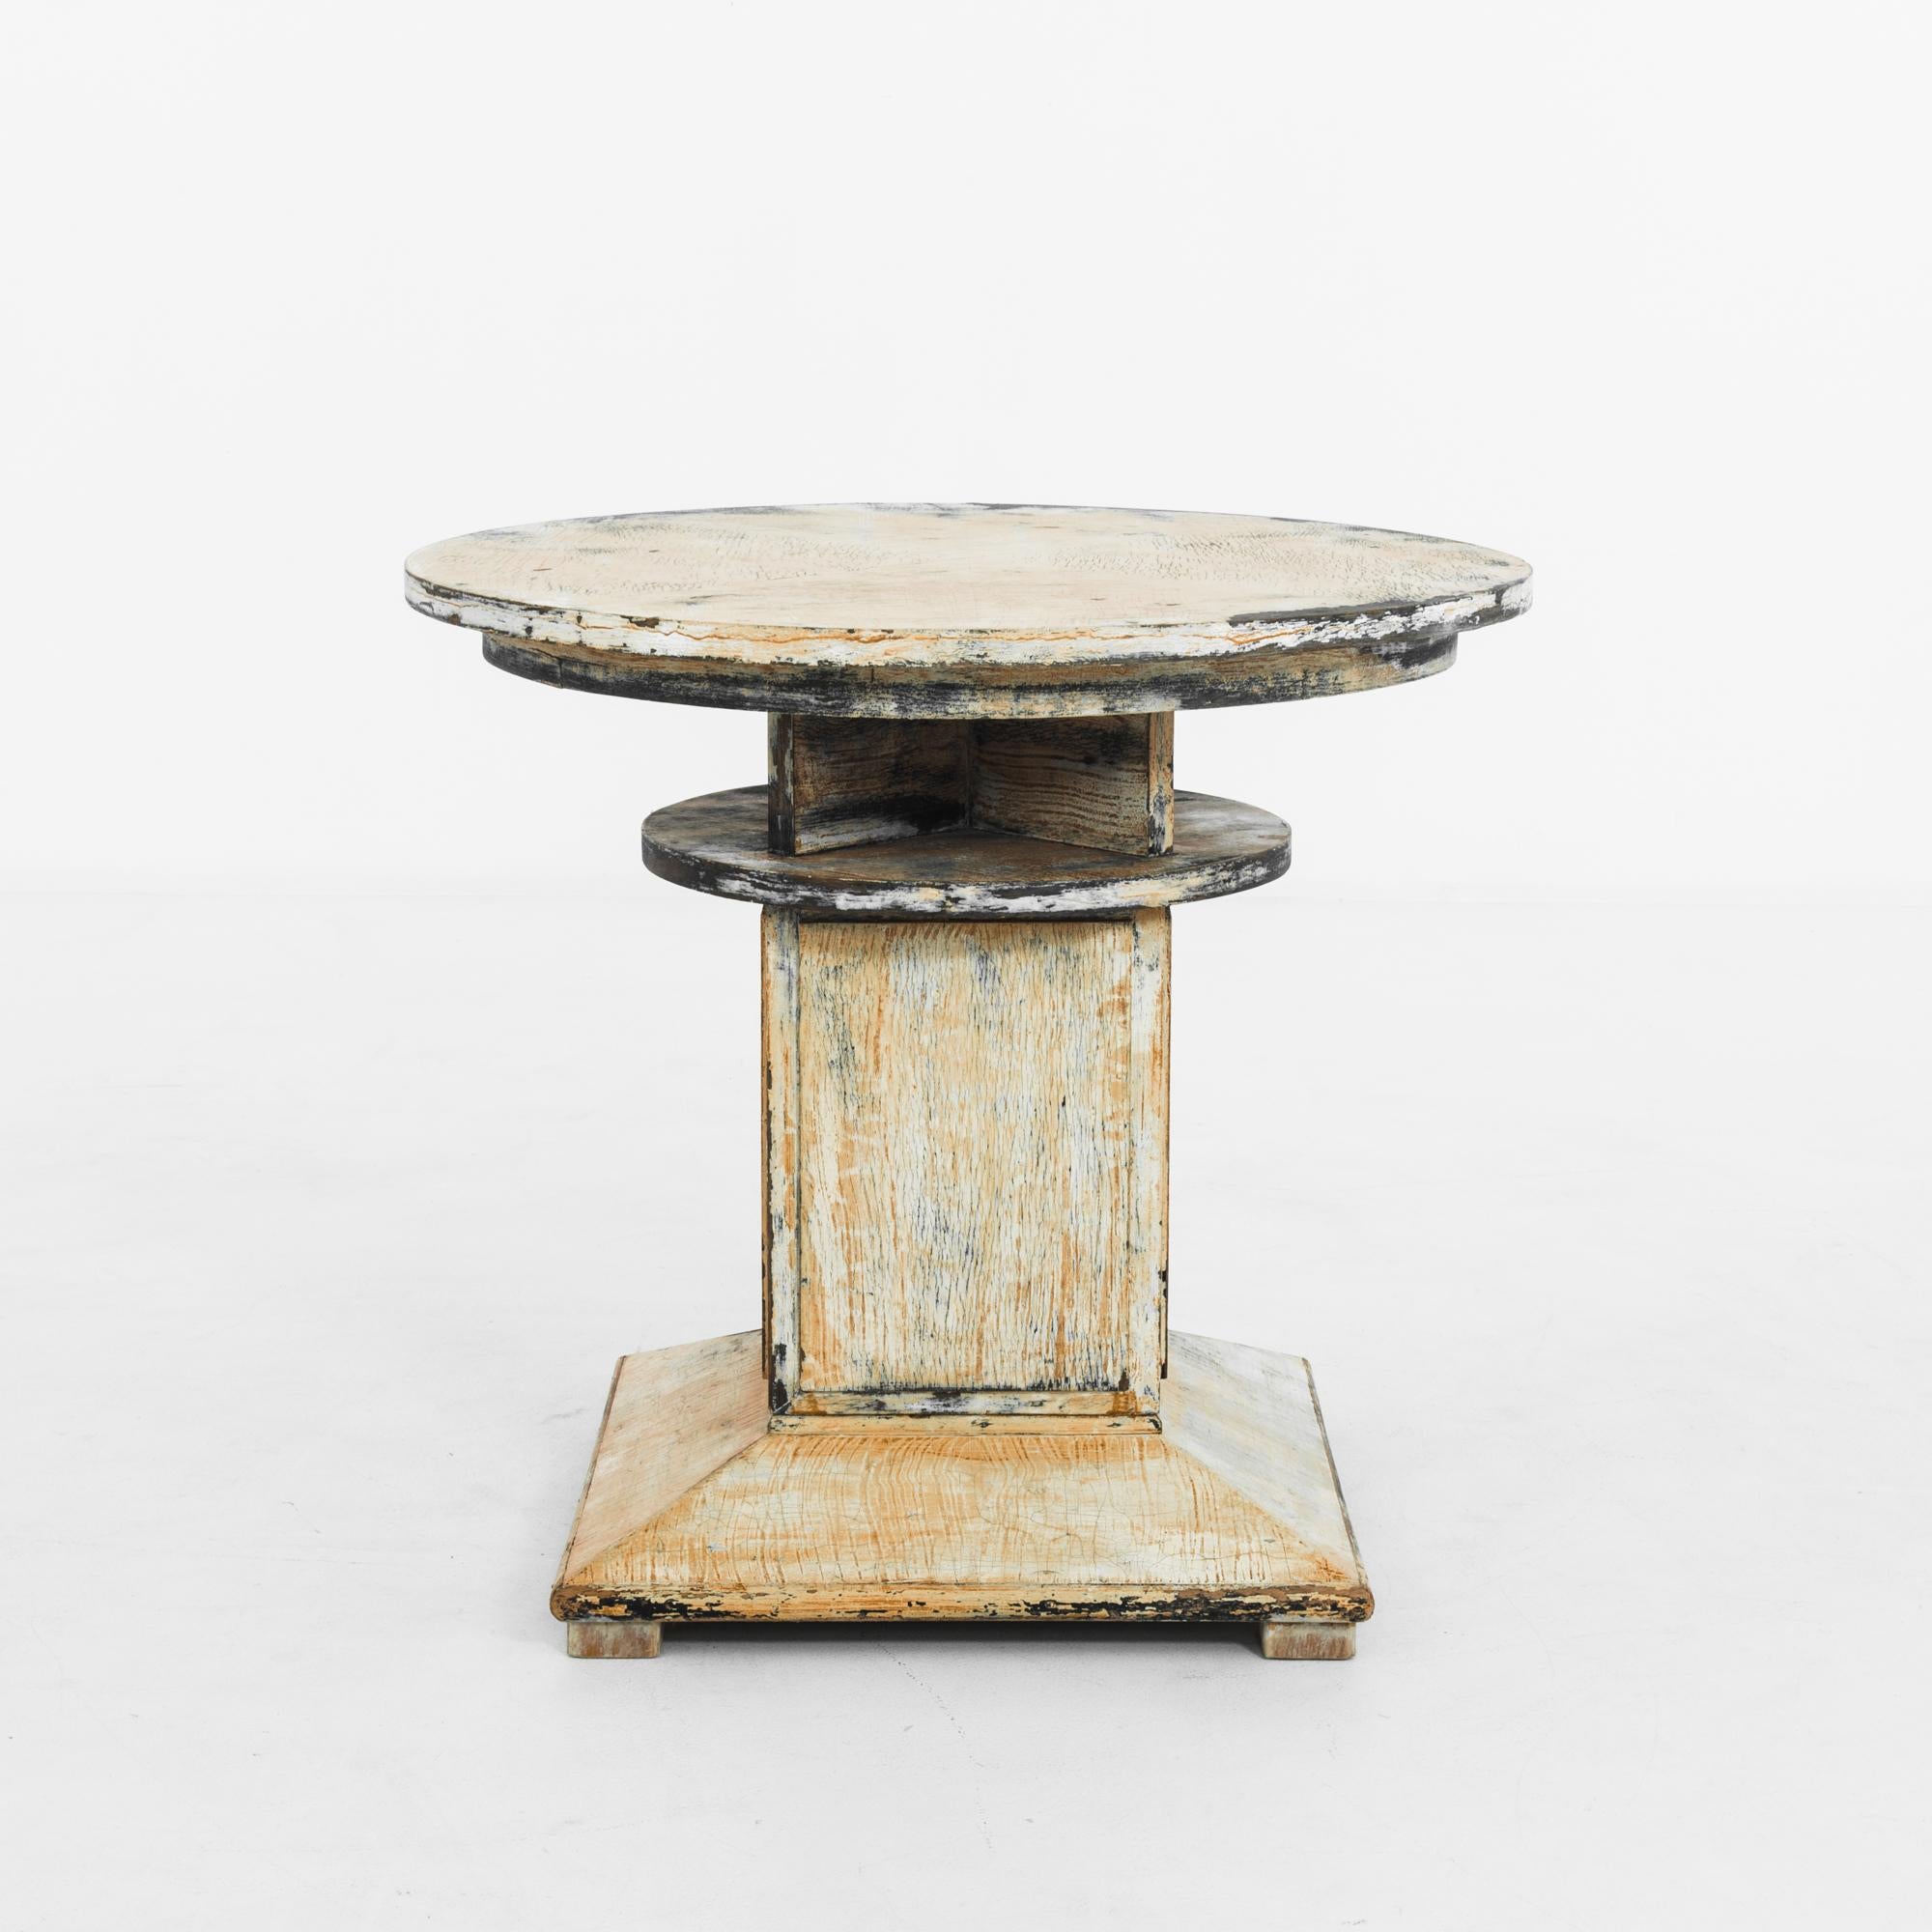 This wooden table was made in the former Czechoslovakia, circa 1930, and features a compelling combination of forms. An X-shaped apron connects the round tabletop and lower tier. The central rectangular post rests on a square base, which is gently